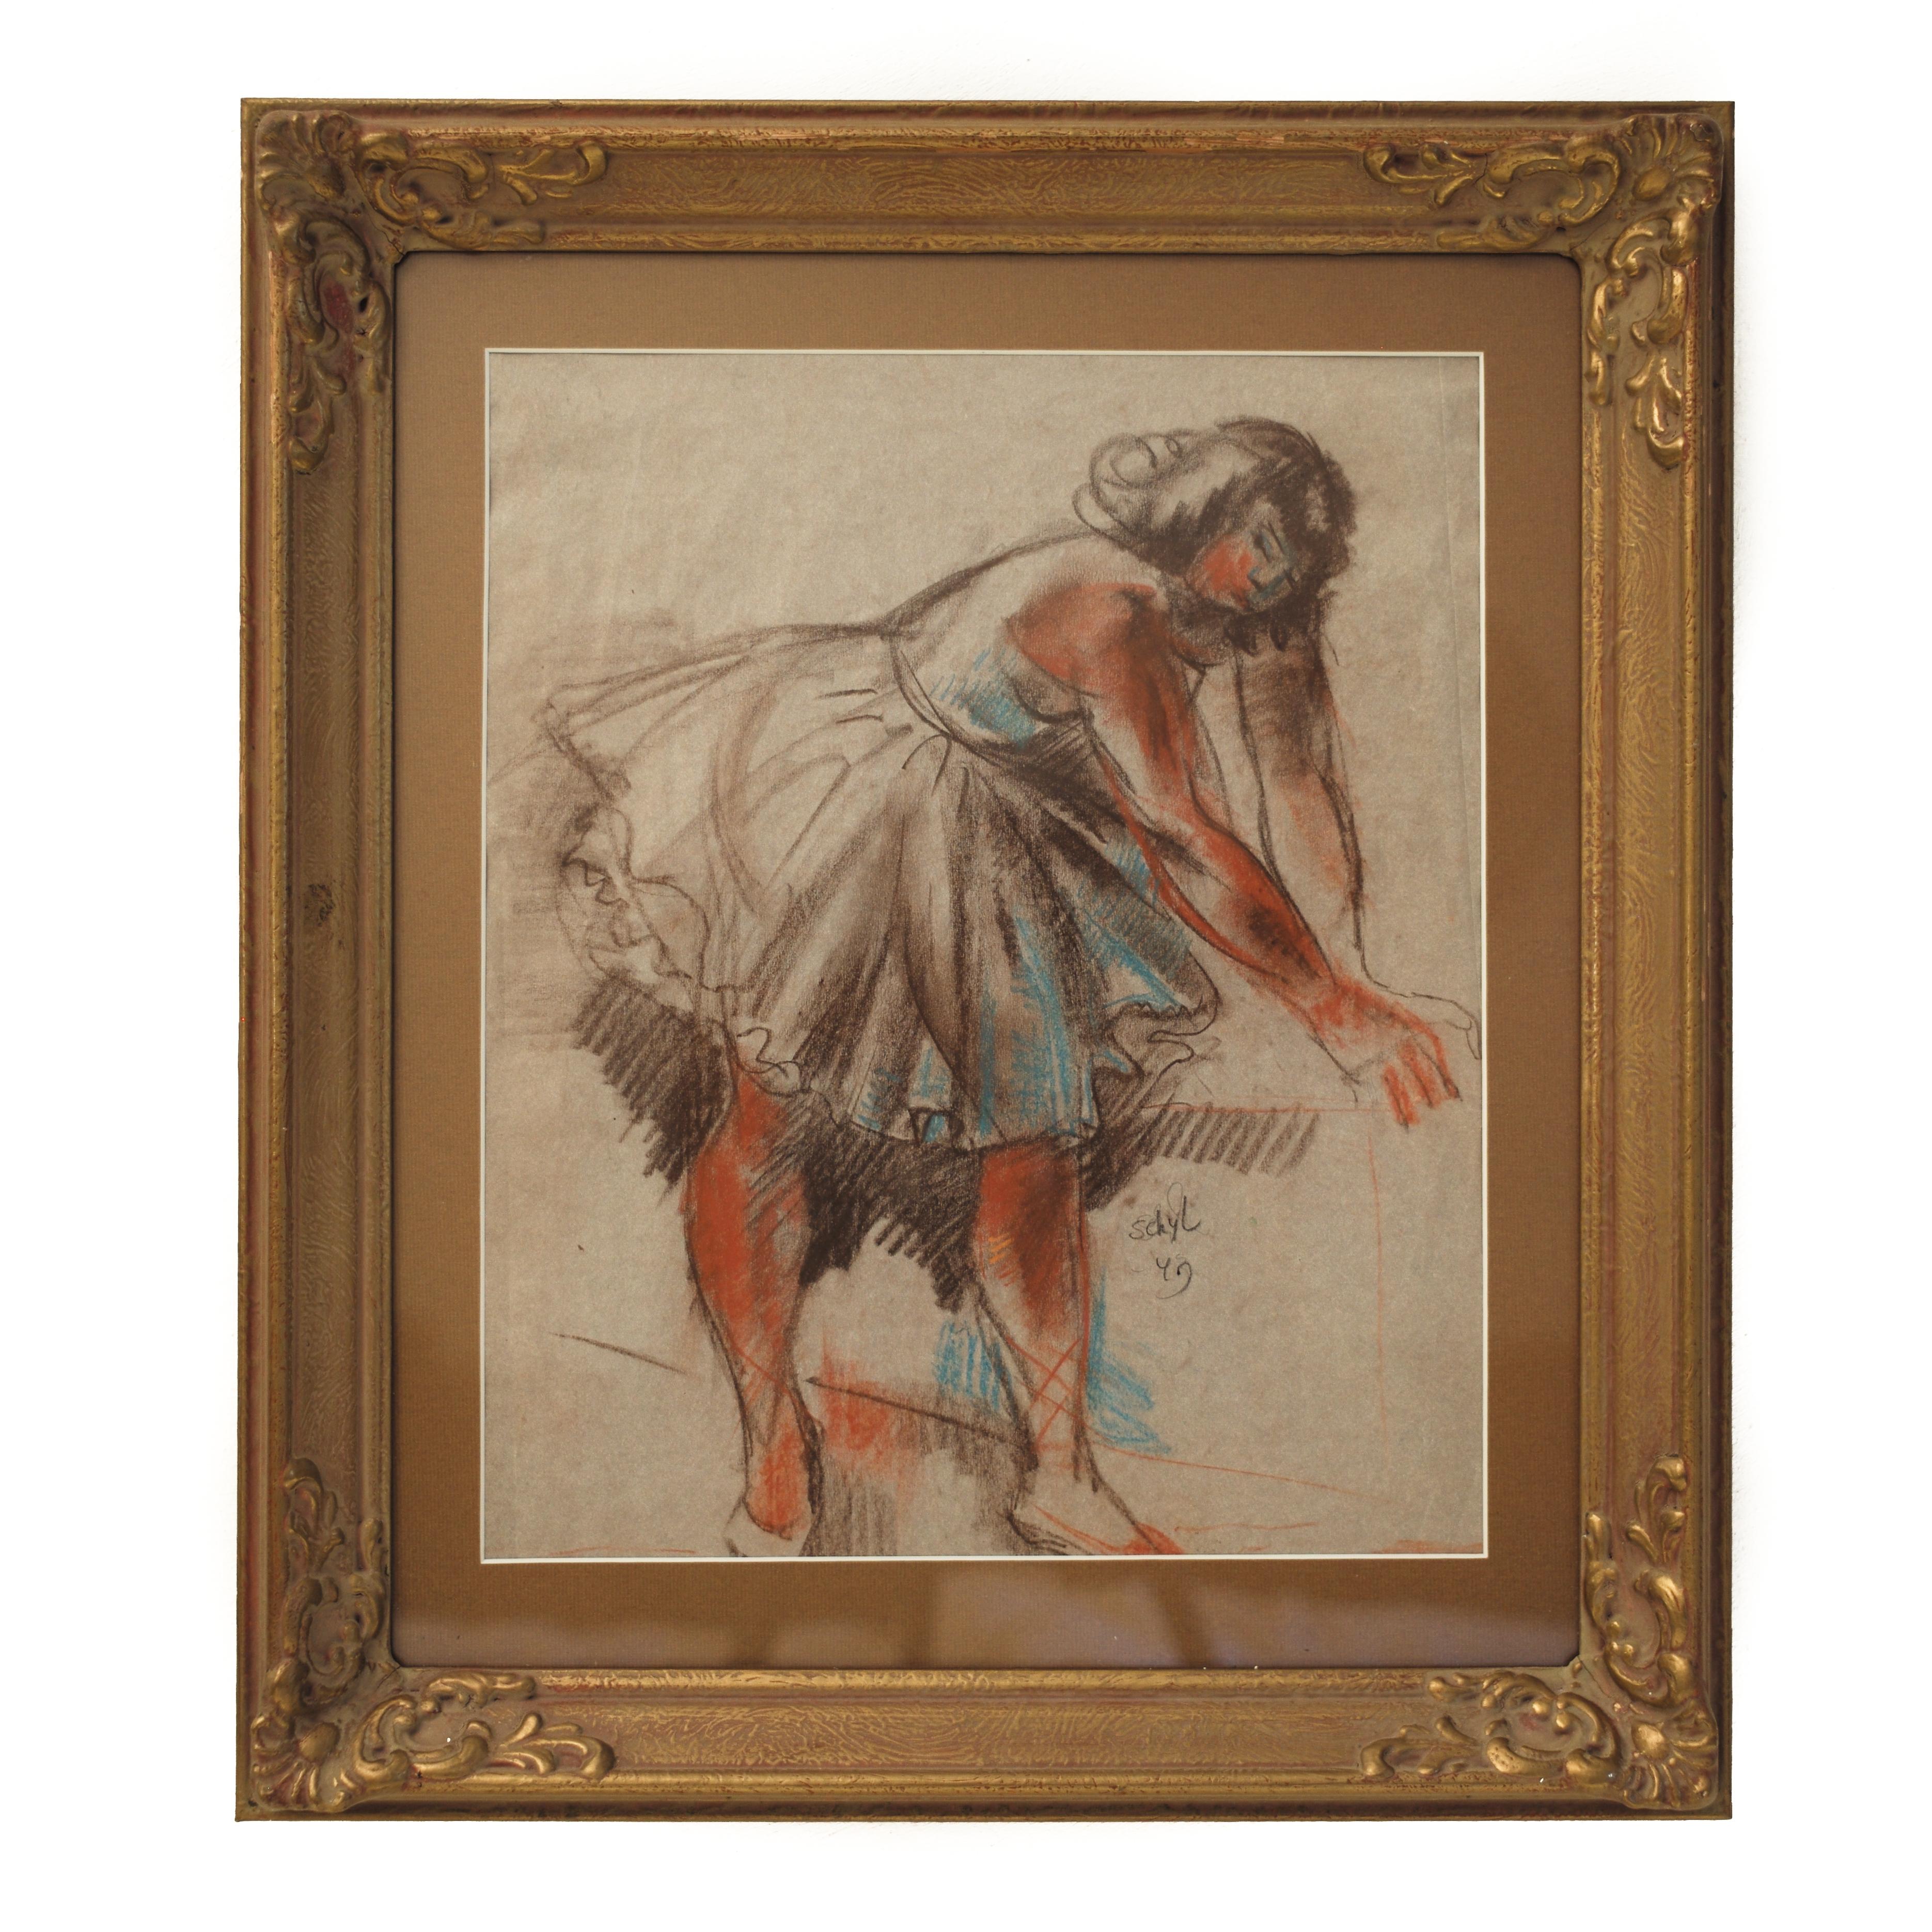 Ballet Dancer by Jules Schyl, Pastel on paper, Similarities with Degas